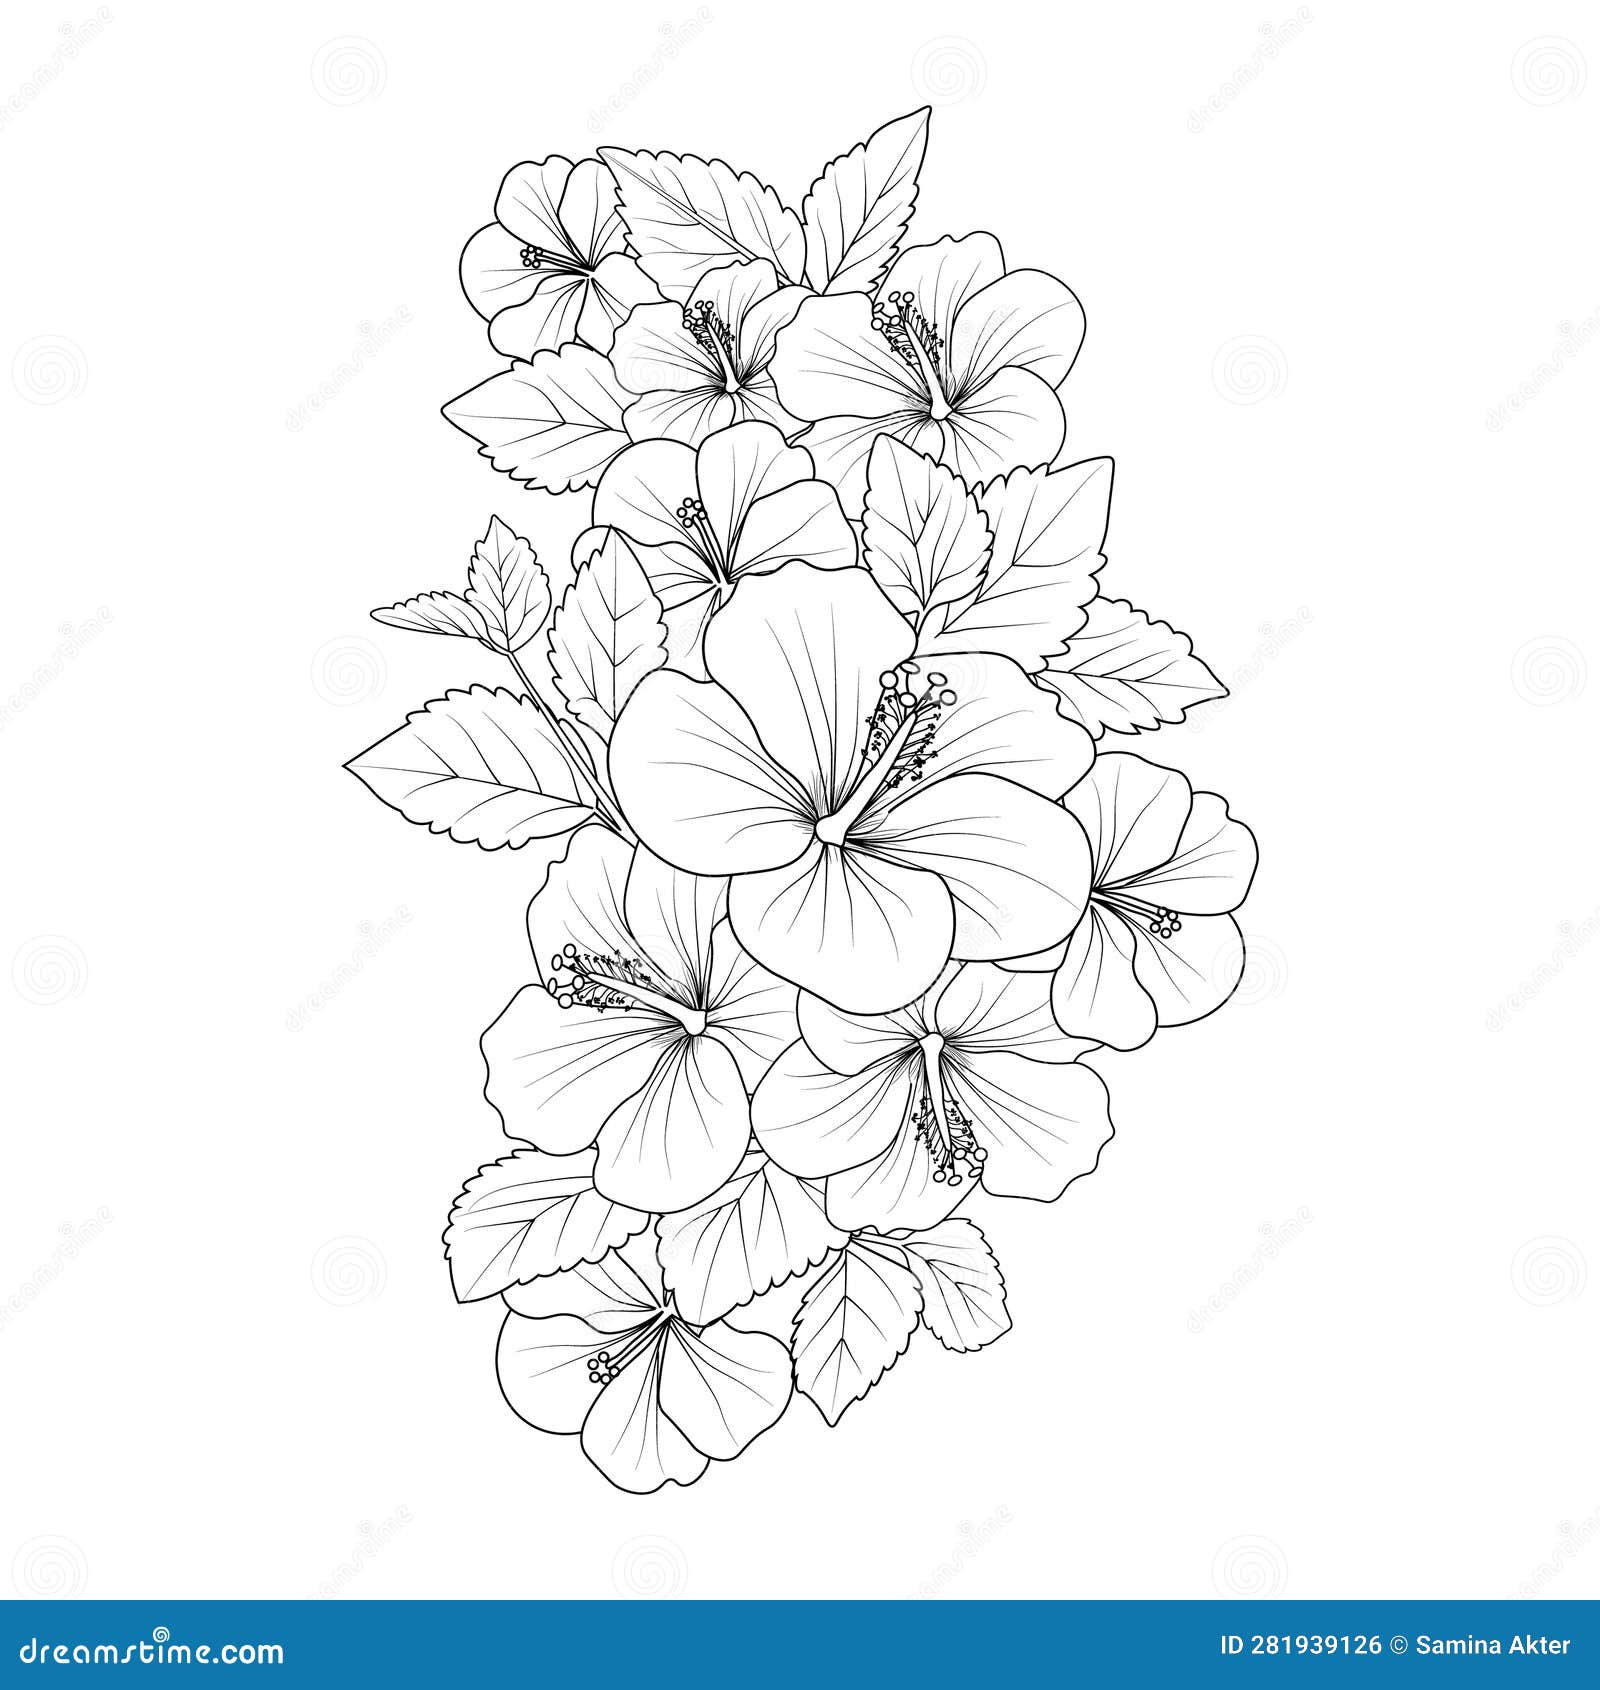 Printable hibiscus flower coloring pages hawaiian hibiscus flower coloring pageshibiscus flower drawing stock vector